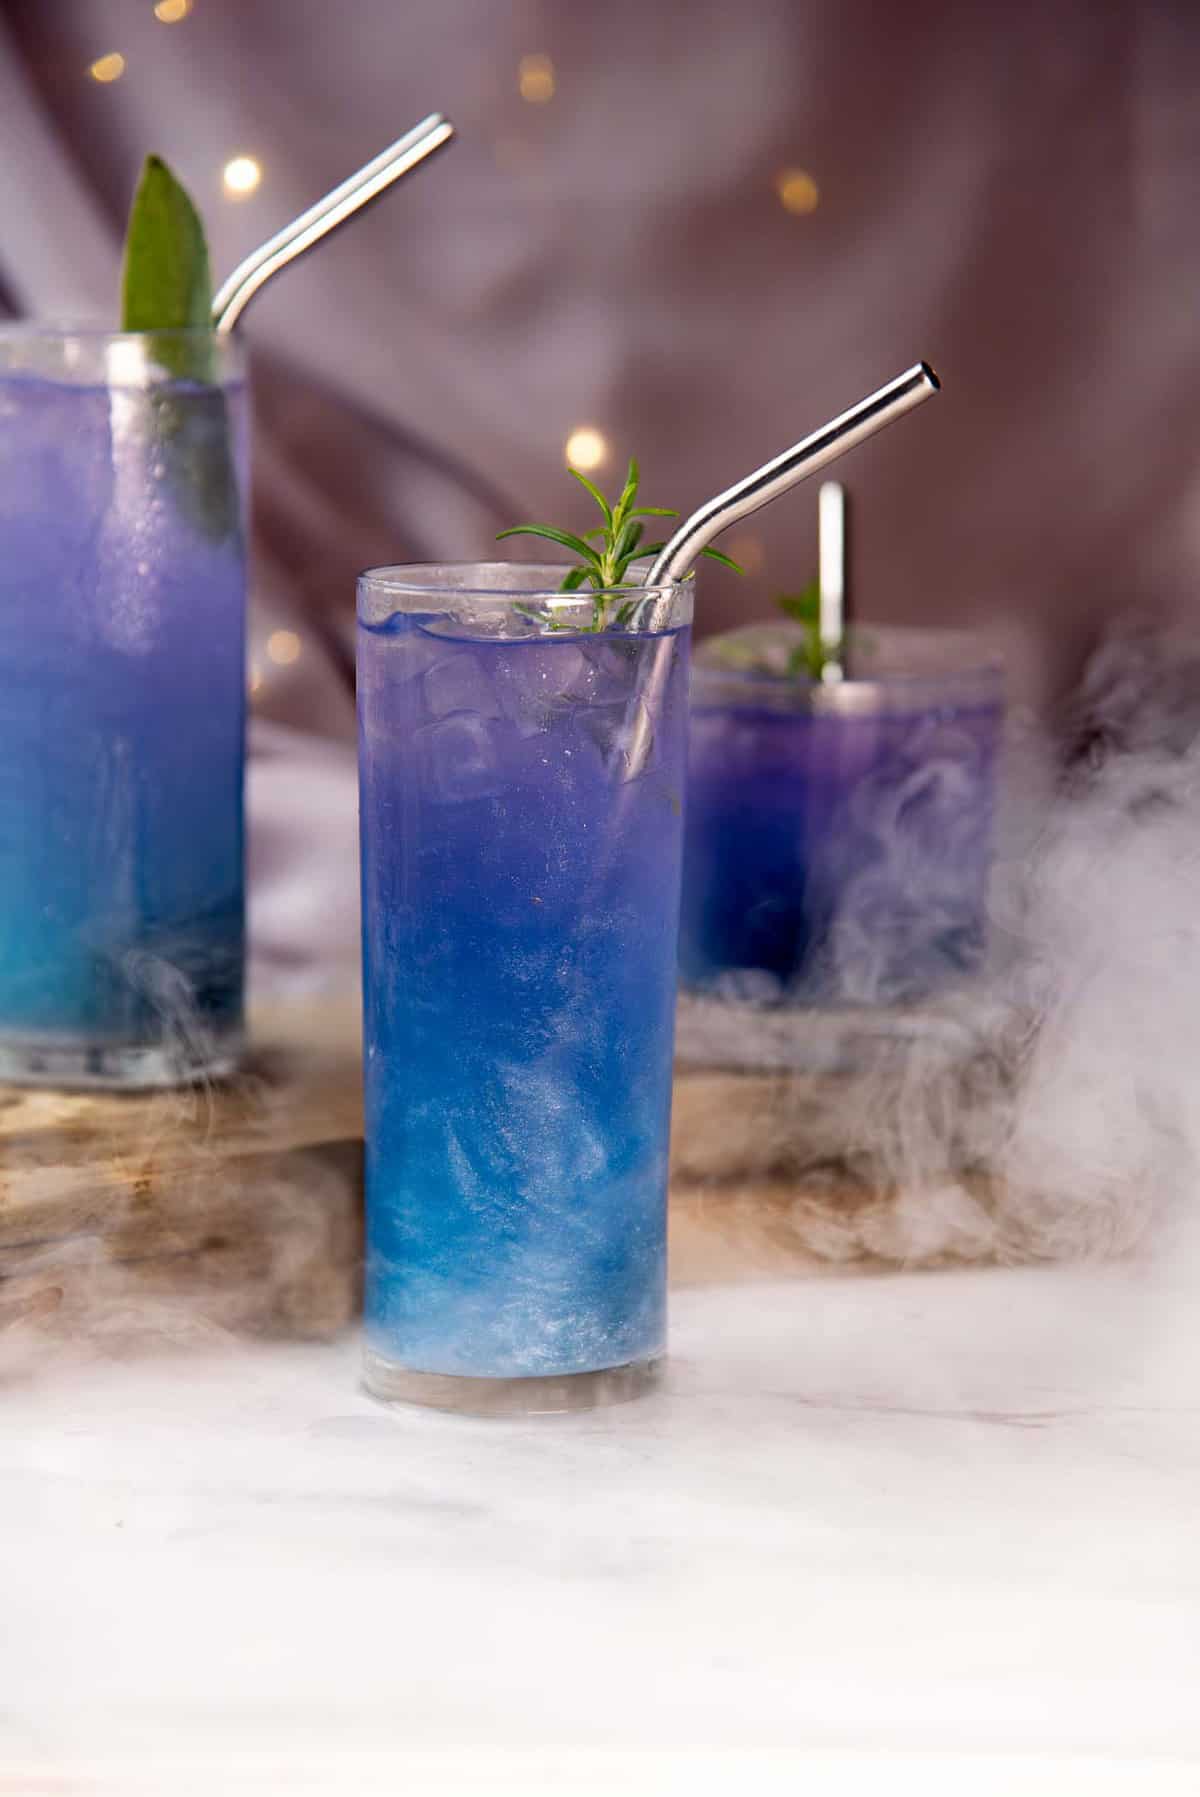 Witches Brew Drink (A Halloween Cocktail) - The Flavor Bender